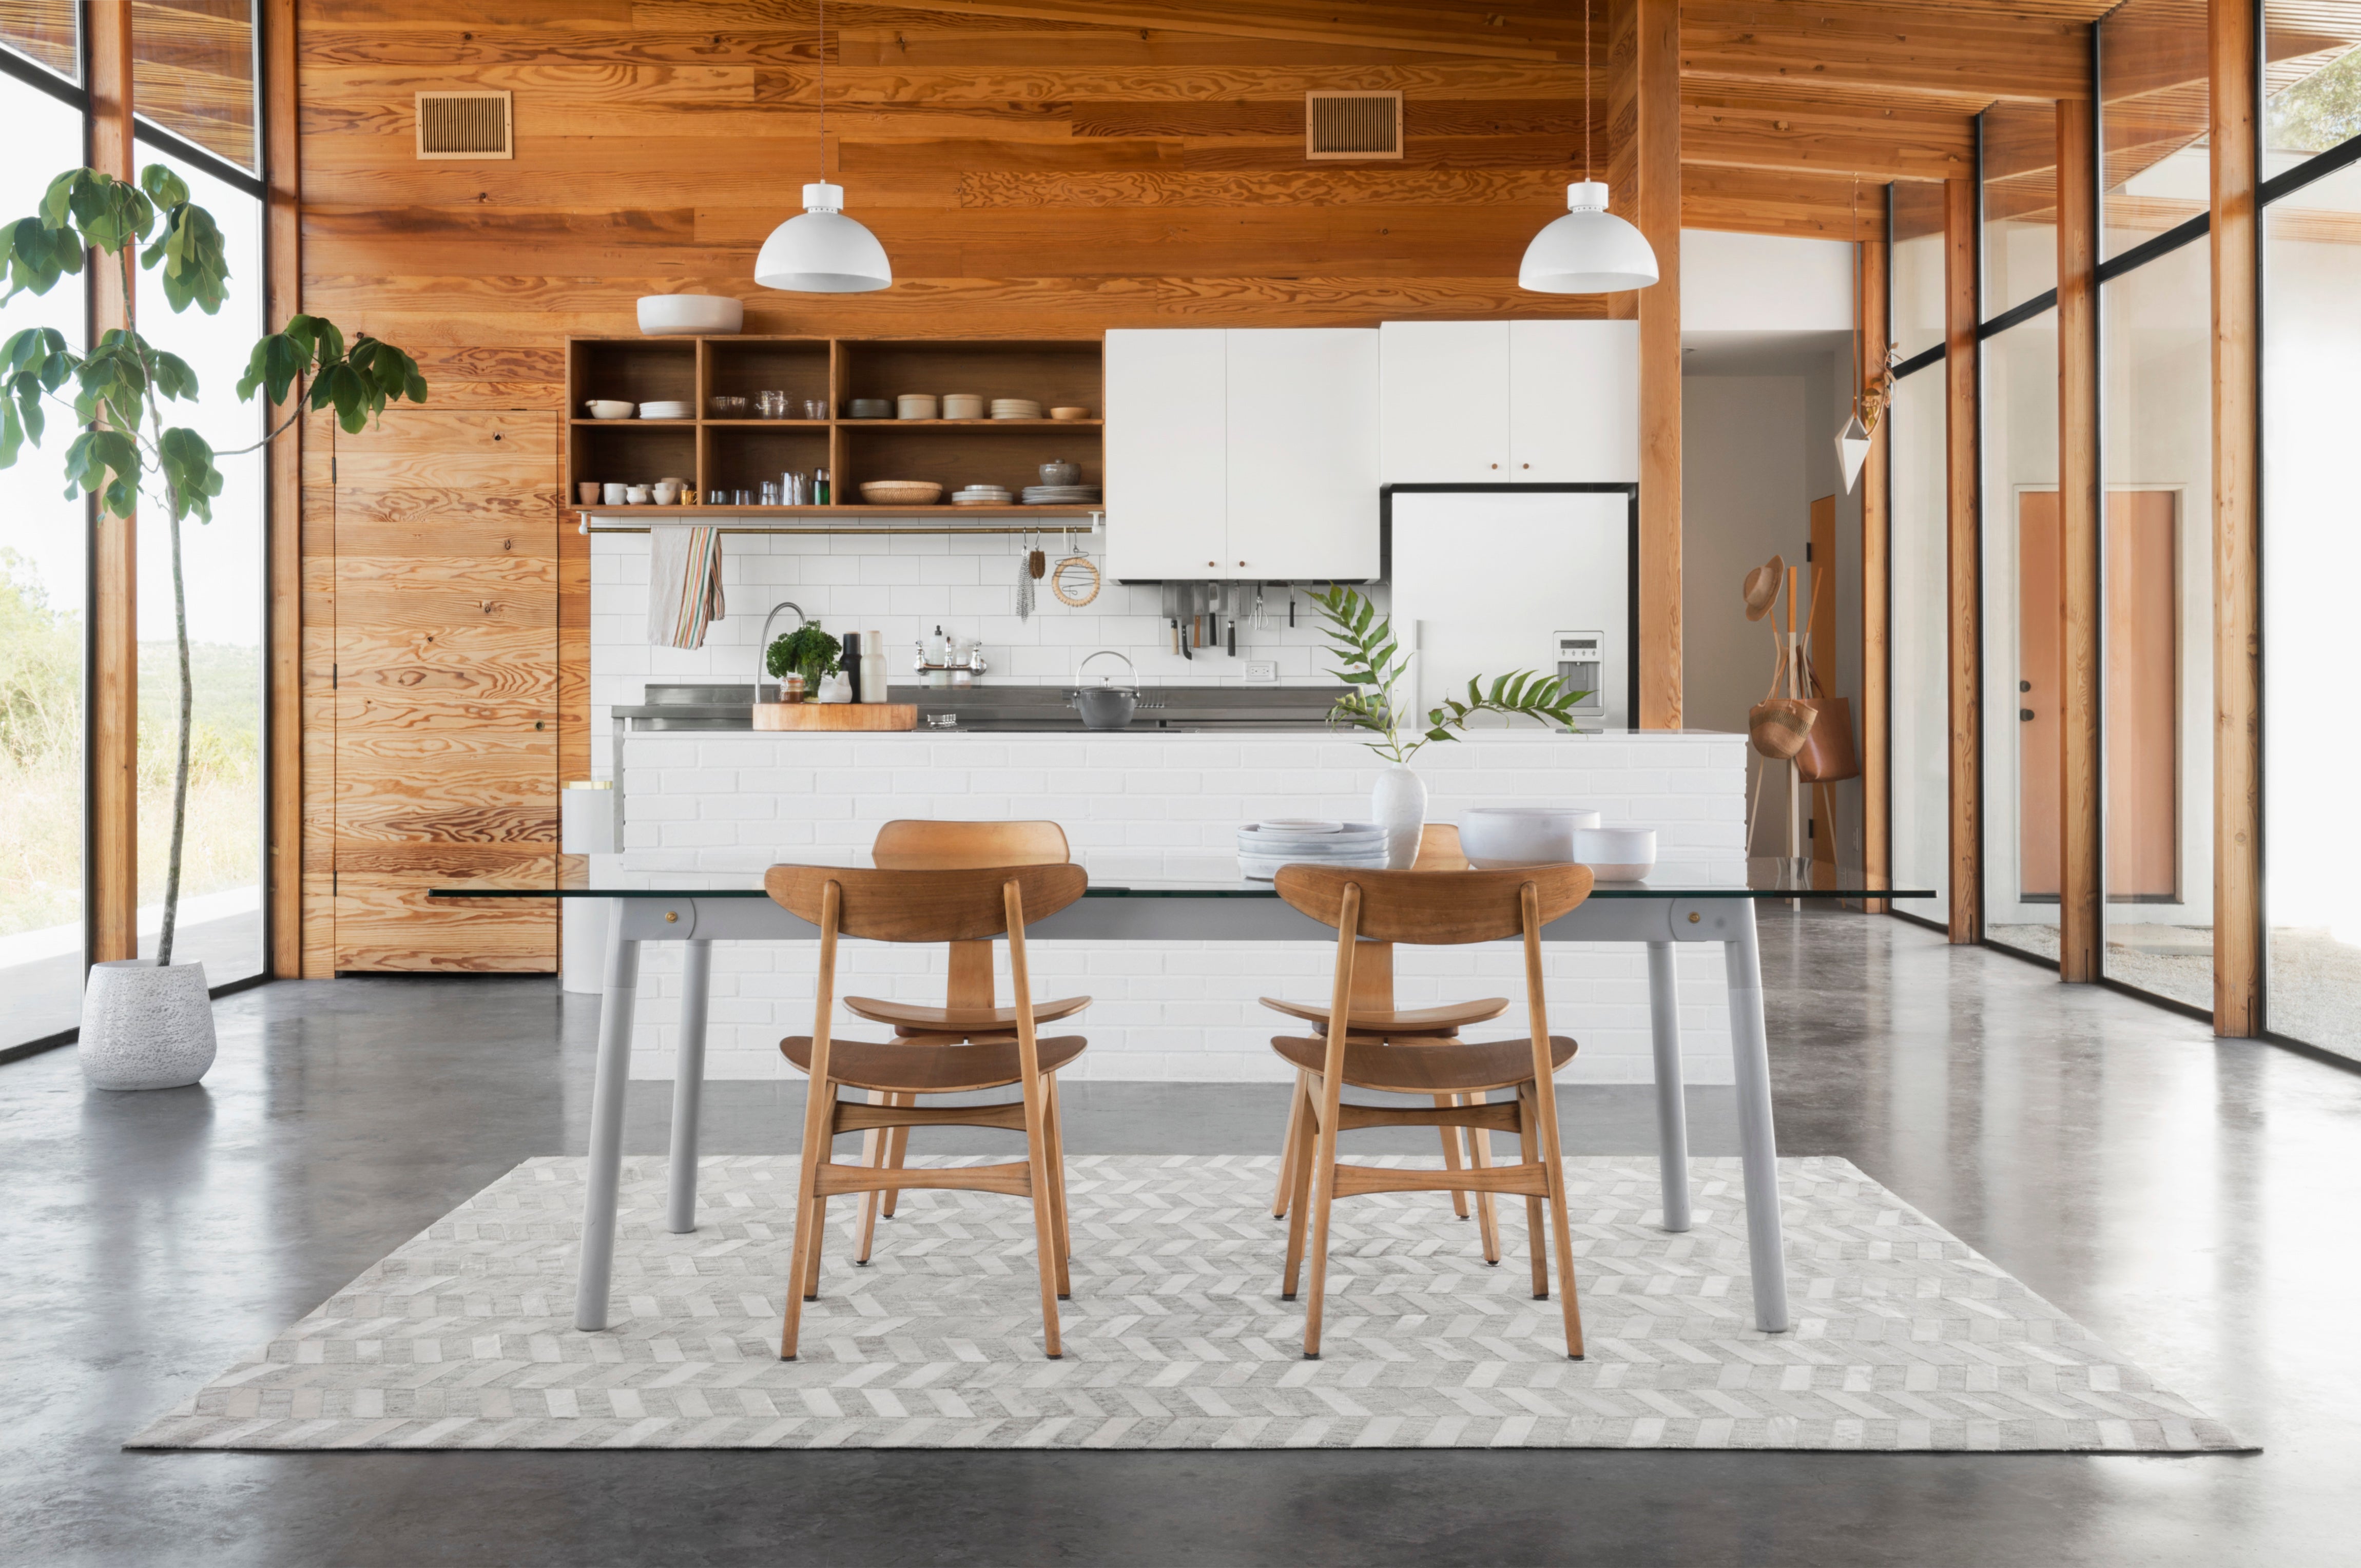 a modern table is in the foreground with four wooden chairs atop a leather, grey chevron patterned rug. In the background is a modern white kitchen with wooden lined walls and ceilings. There is a fiddle fig leaf tree in the corner and floor to ceiling windows on the right.